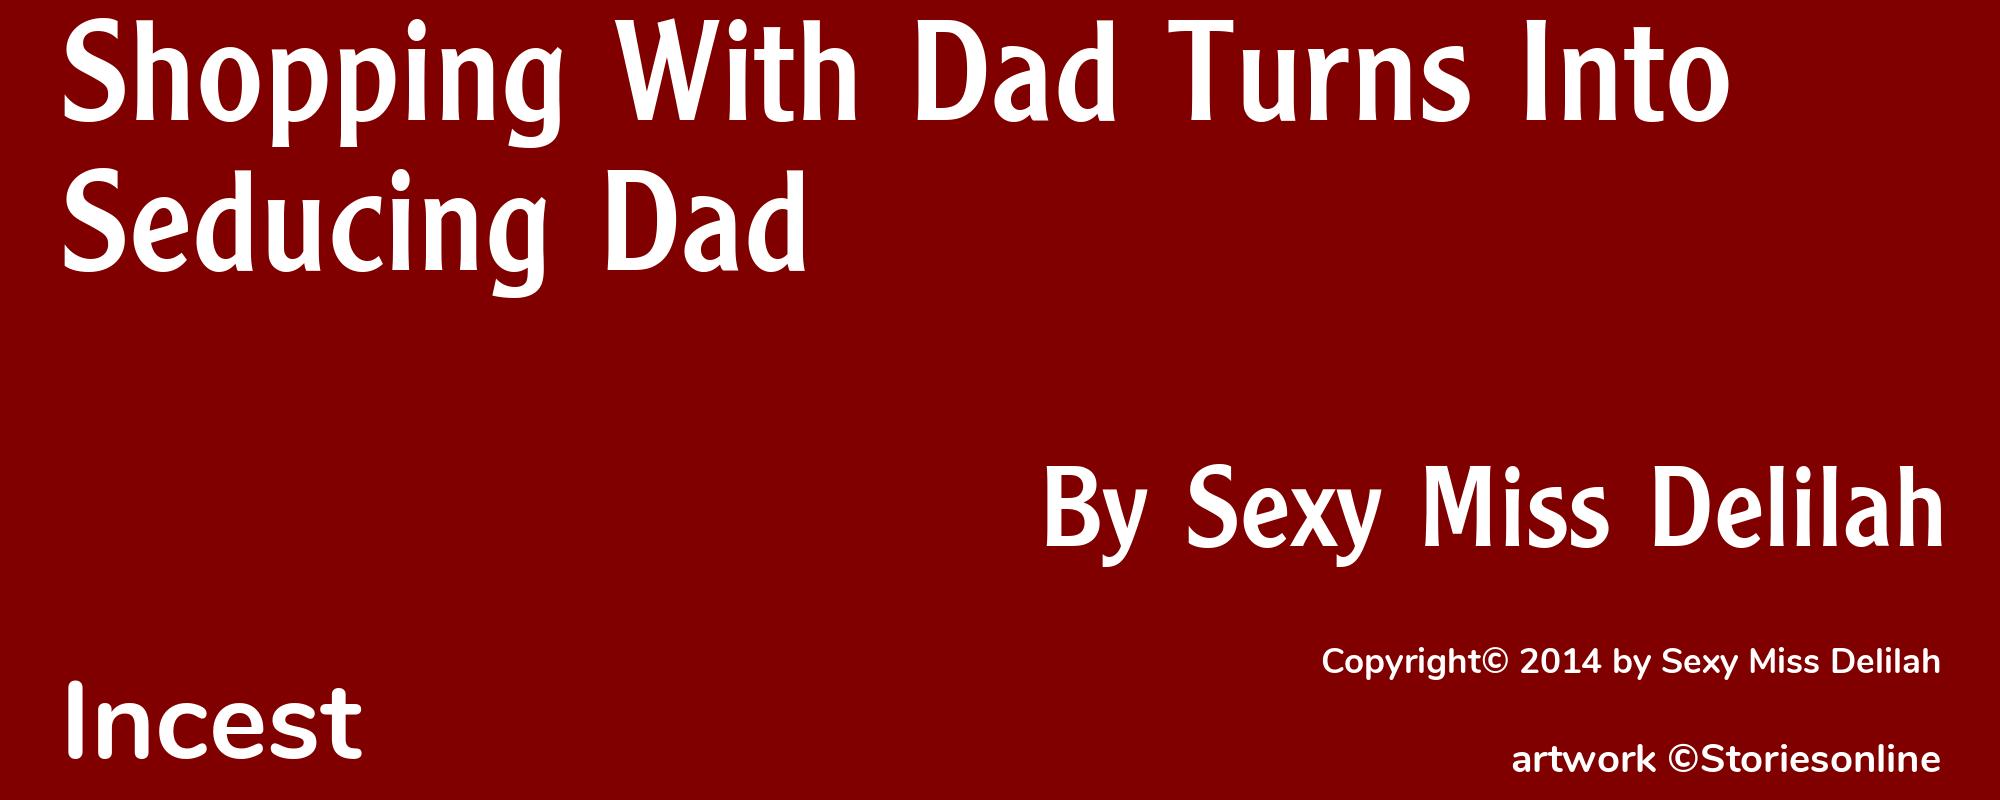 Shopping With Dad Turns Into Seducing Dad - Cover